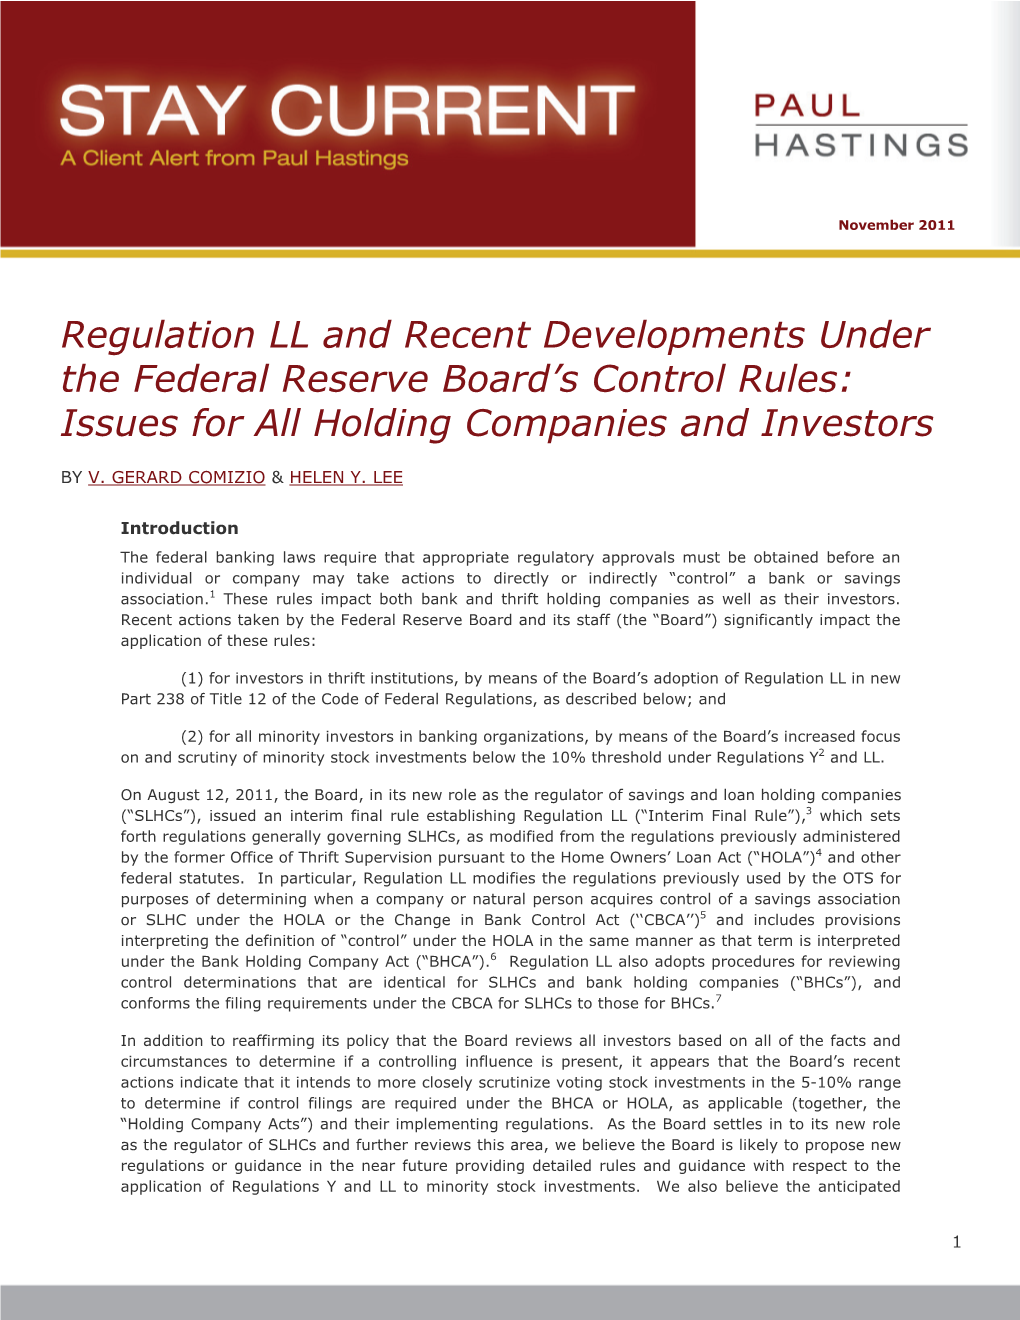 Regulation LL and Recent Developments Under the Federal Reserve Board’S Control Rules: Issues for All Holding Companies and Investors